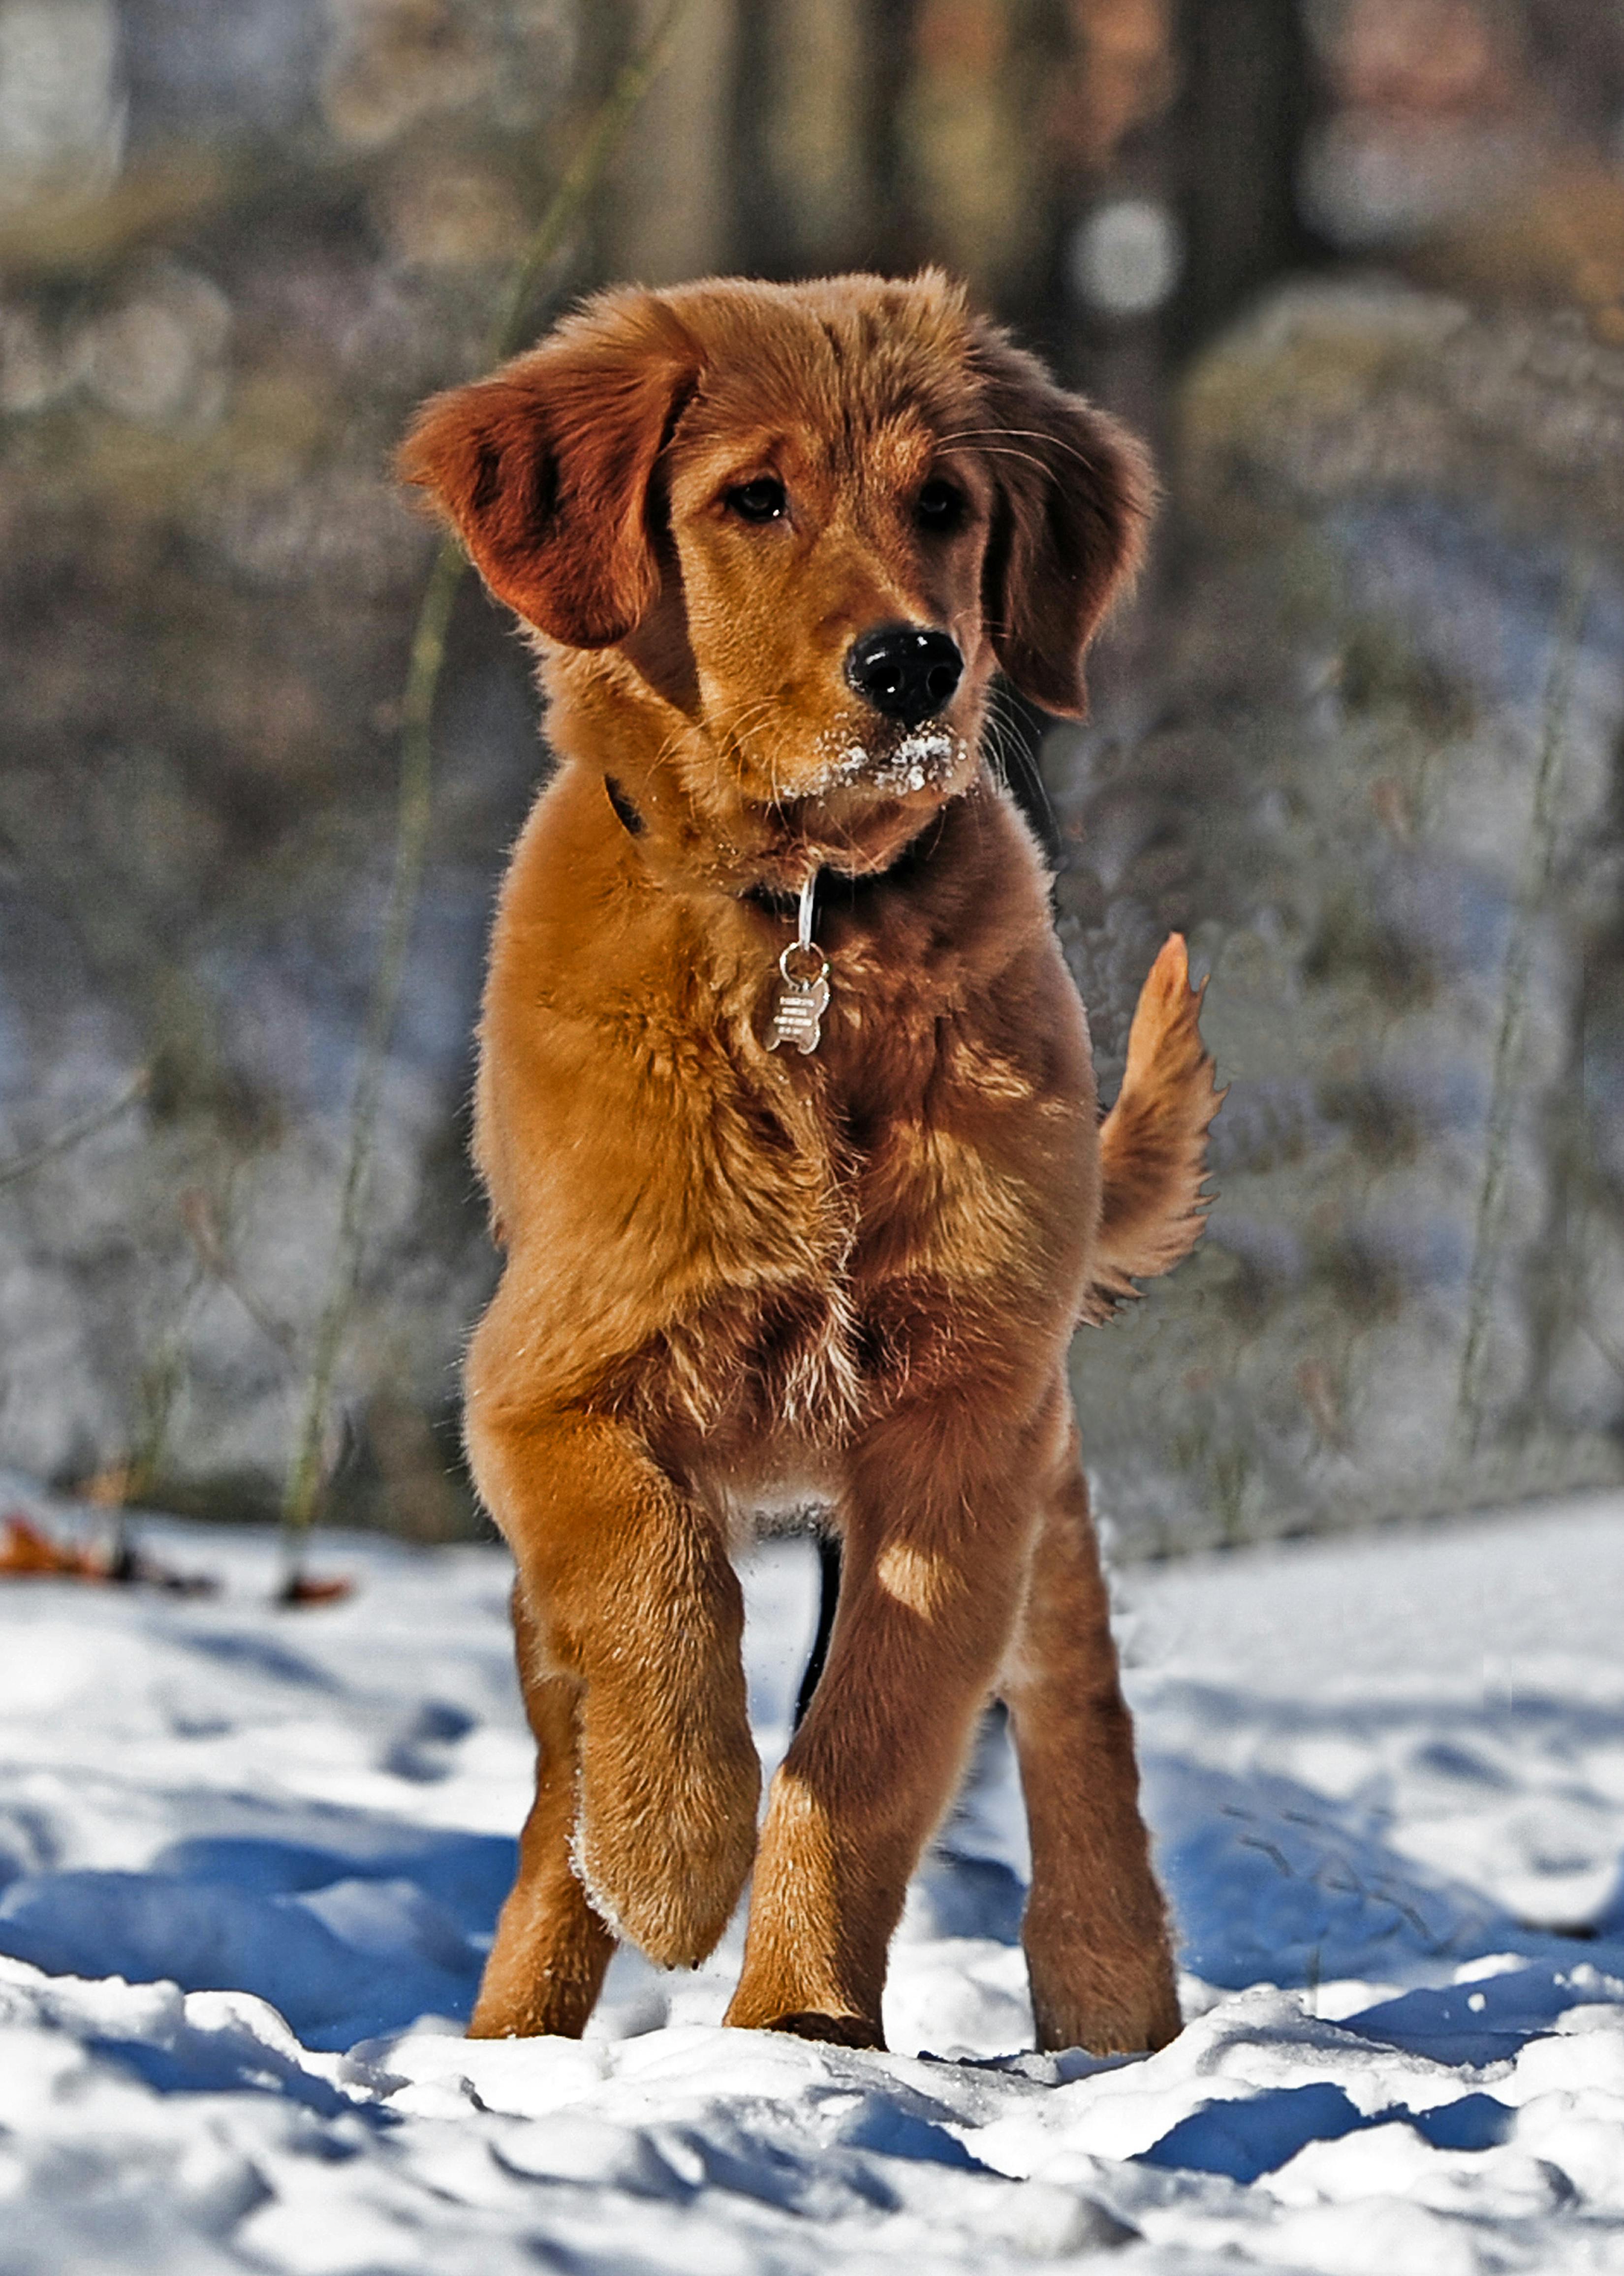 Selective Photo of Dark Golden Retriever Puppy Stands on Snowfield ... - Pexels Photo 773971.jpeg?cs=srgb&Dl=selective Photo Of Dark GolDen Retriever Puppy StanDs On 773971